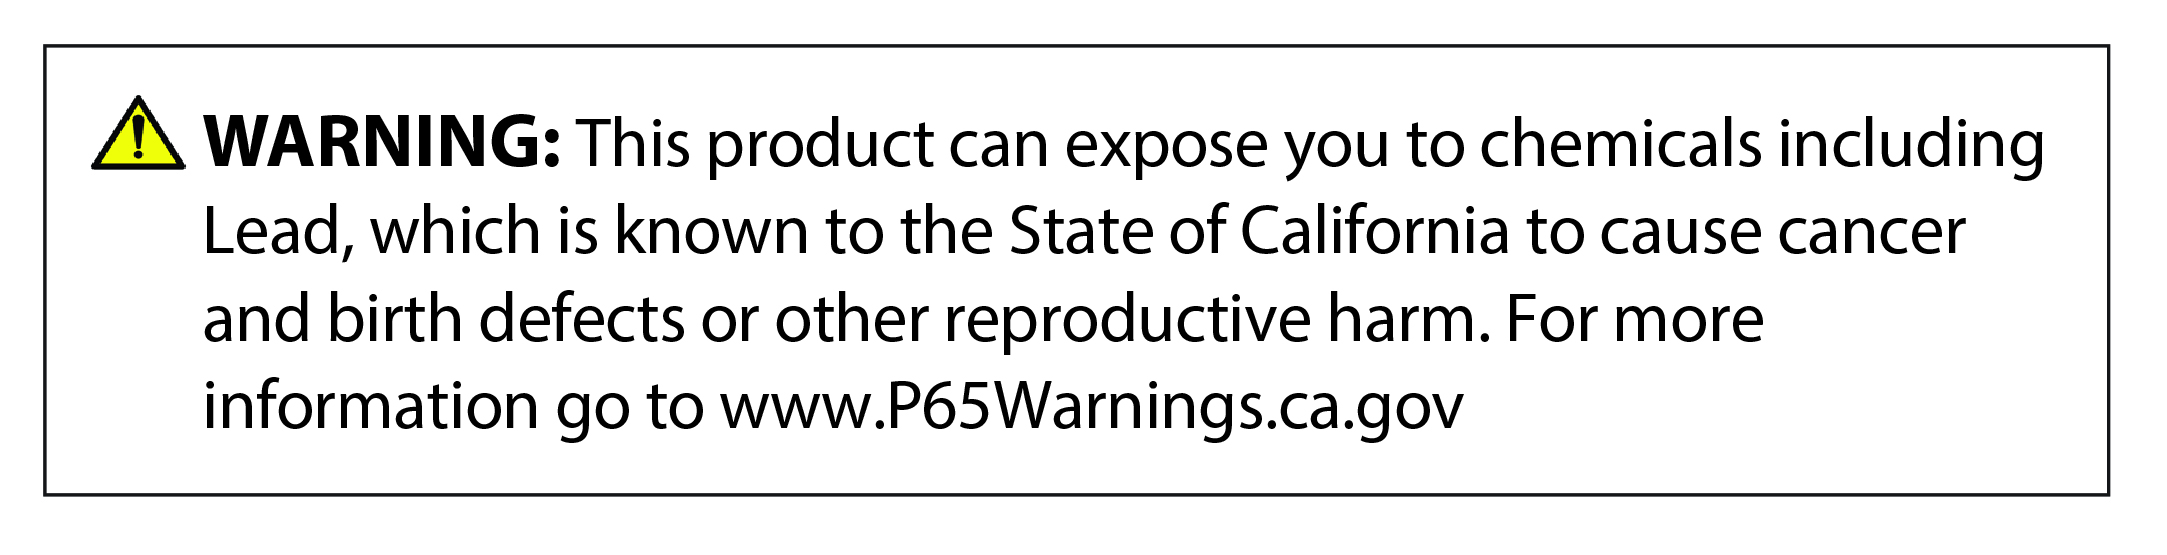 who supports prop 65